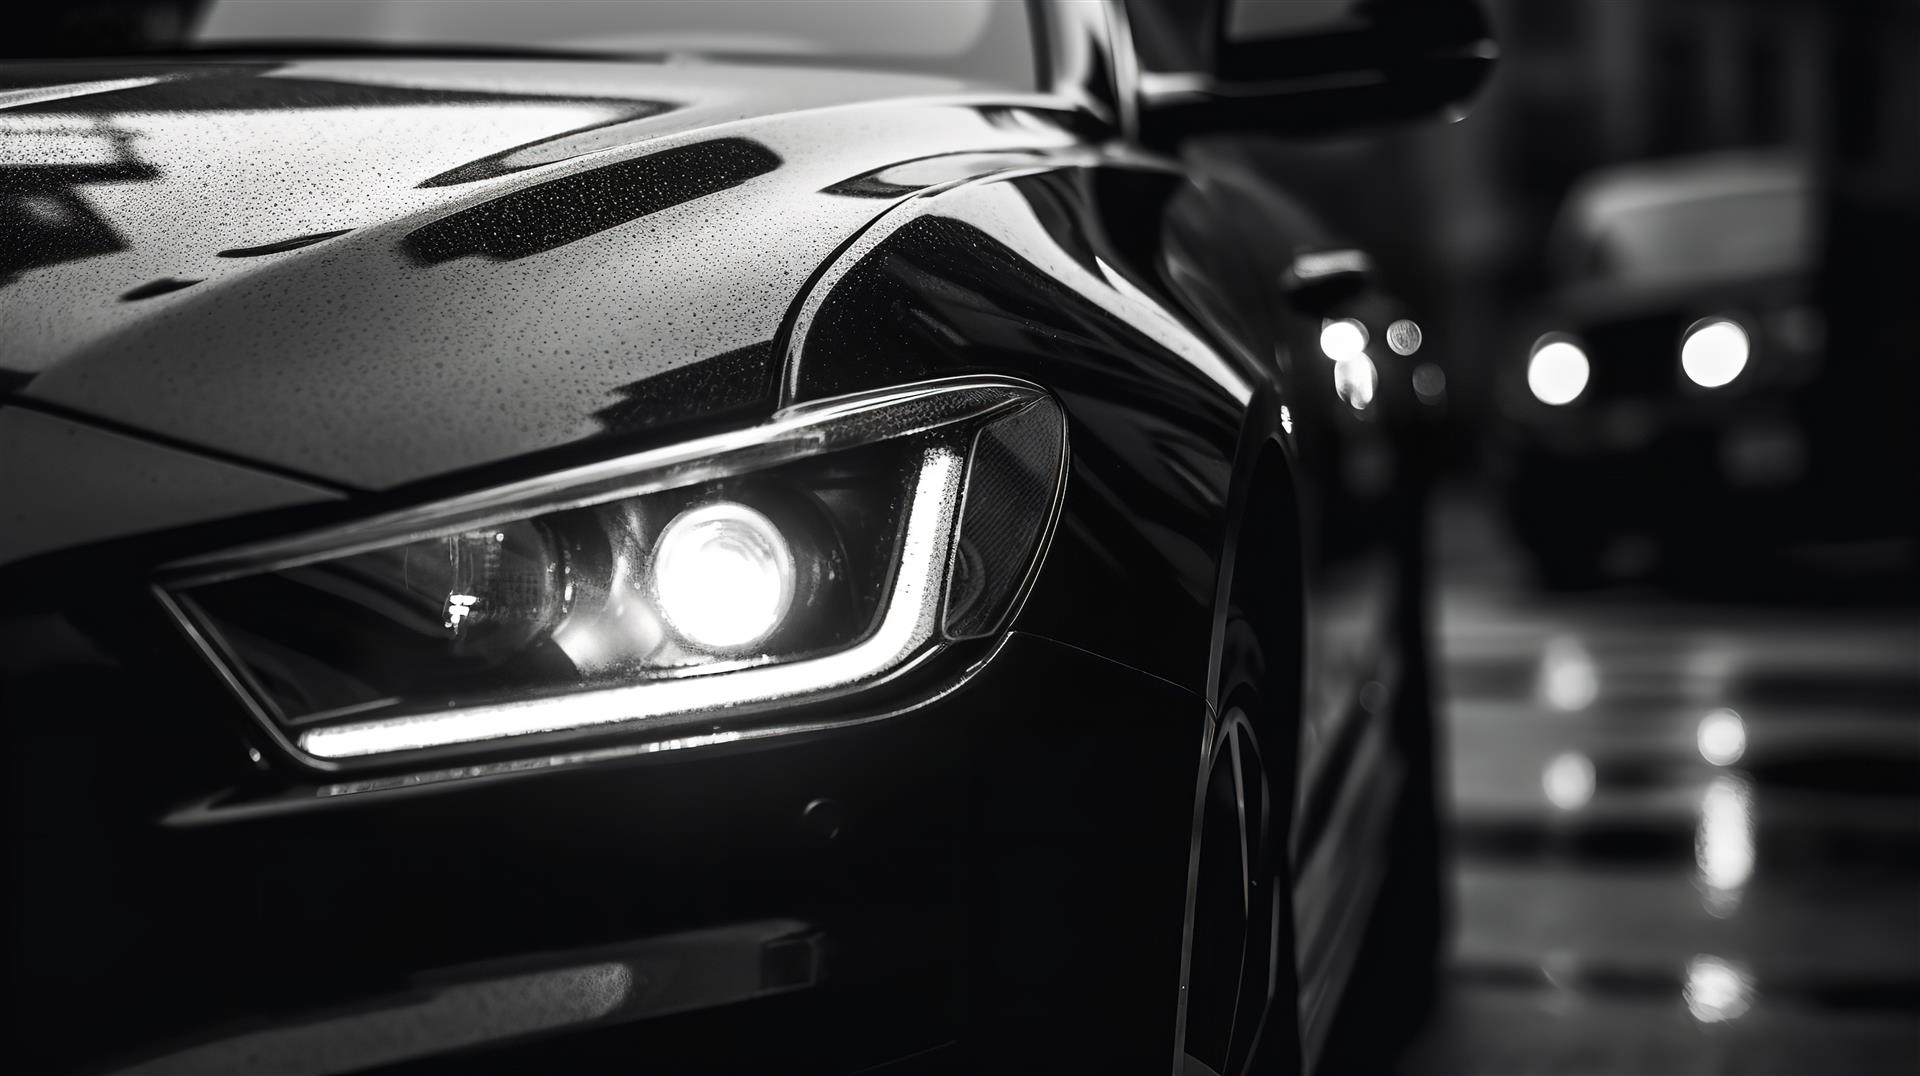 How Can Bad or Malfunctioning Headlights Be Dangerous?